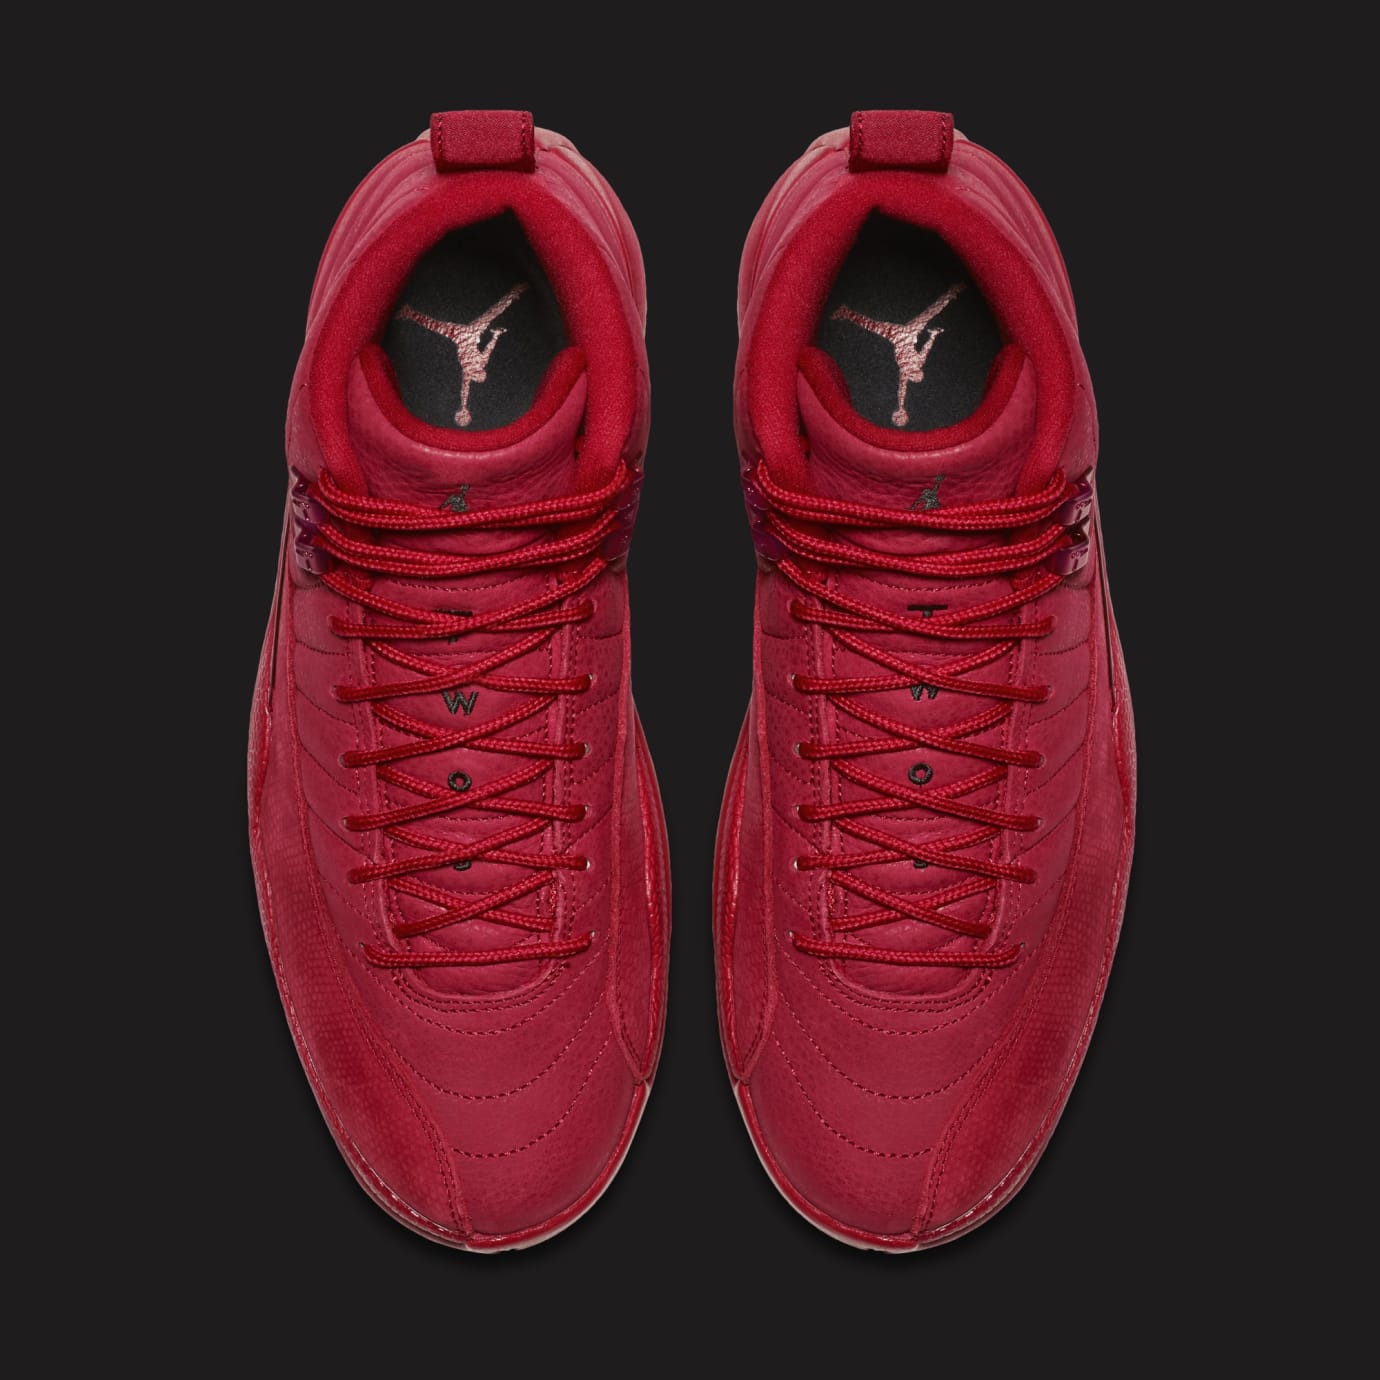 Air Jordan 12 Gym Red/Gym Red-Black 130690-601 University Blue/Metallic  Gold-Black 130690-430 Release Date | Sole Collector